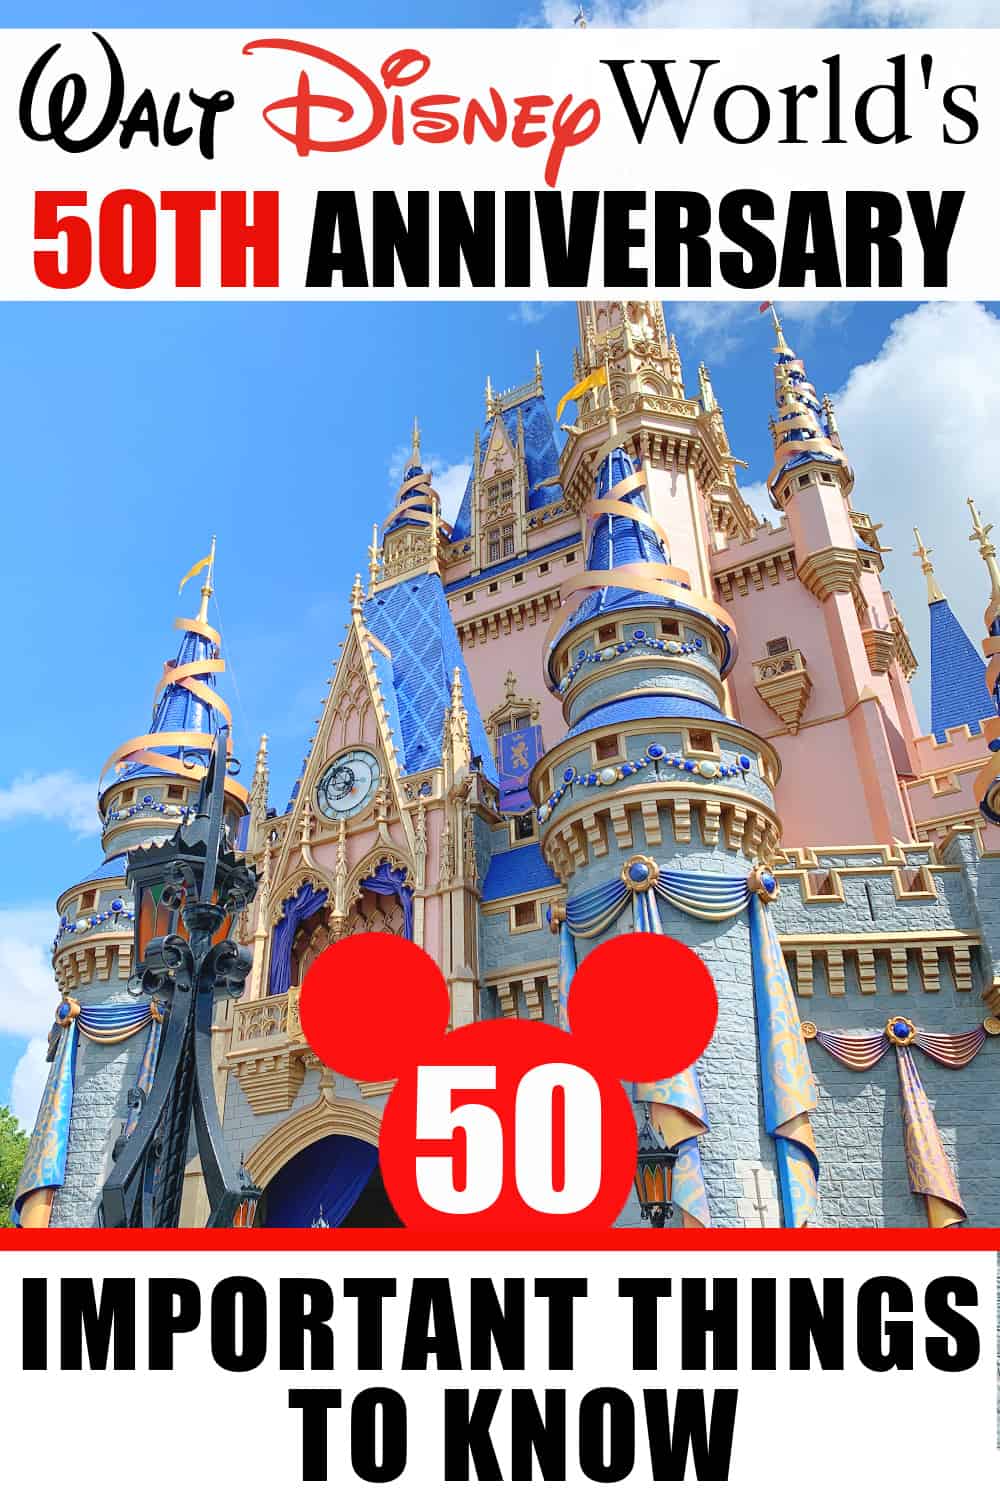 From parking to rope drop to extra time in the parks and merchandise, here are 50 important things to know about Disney World's 50th Anniversary on October 1st, 2021! #WDW #Disneyworld #Anniversary #familyTravel #Orlando #themeparks